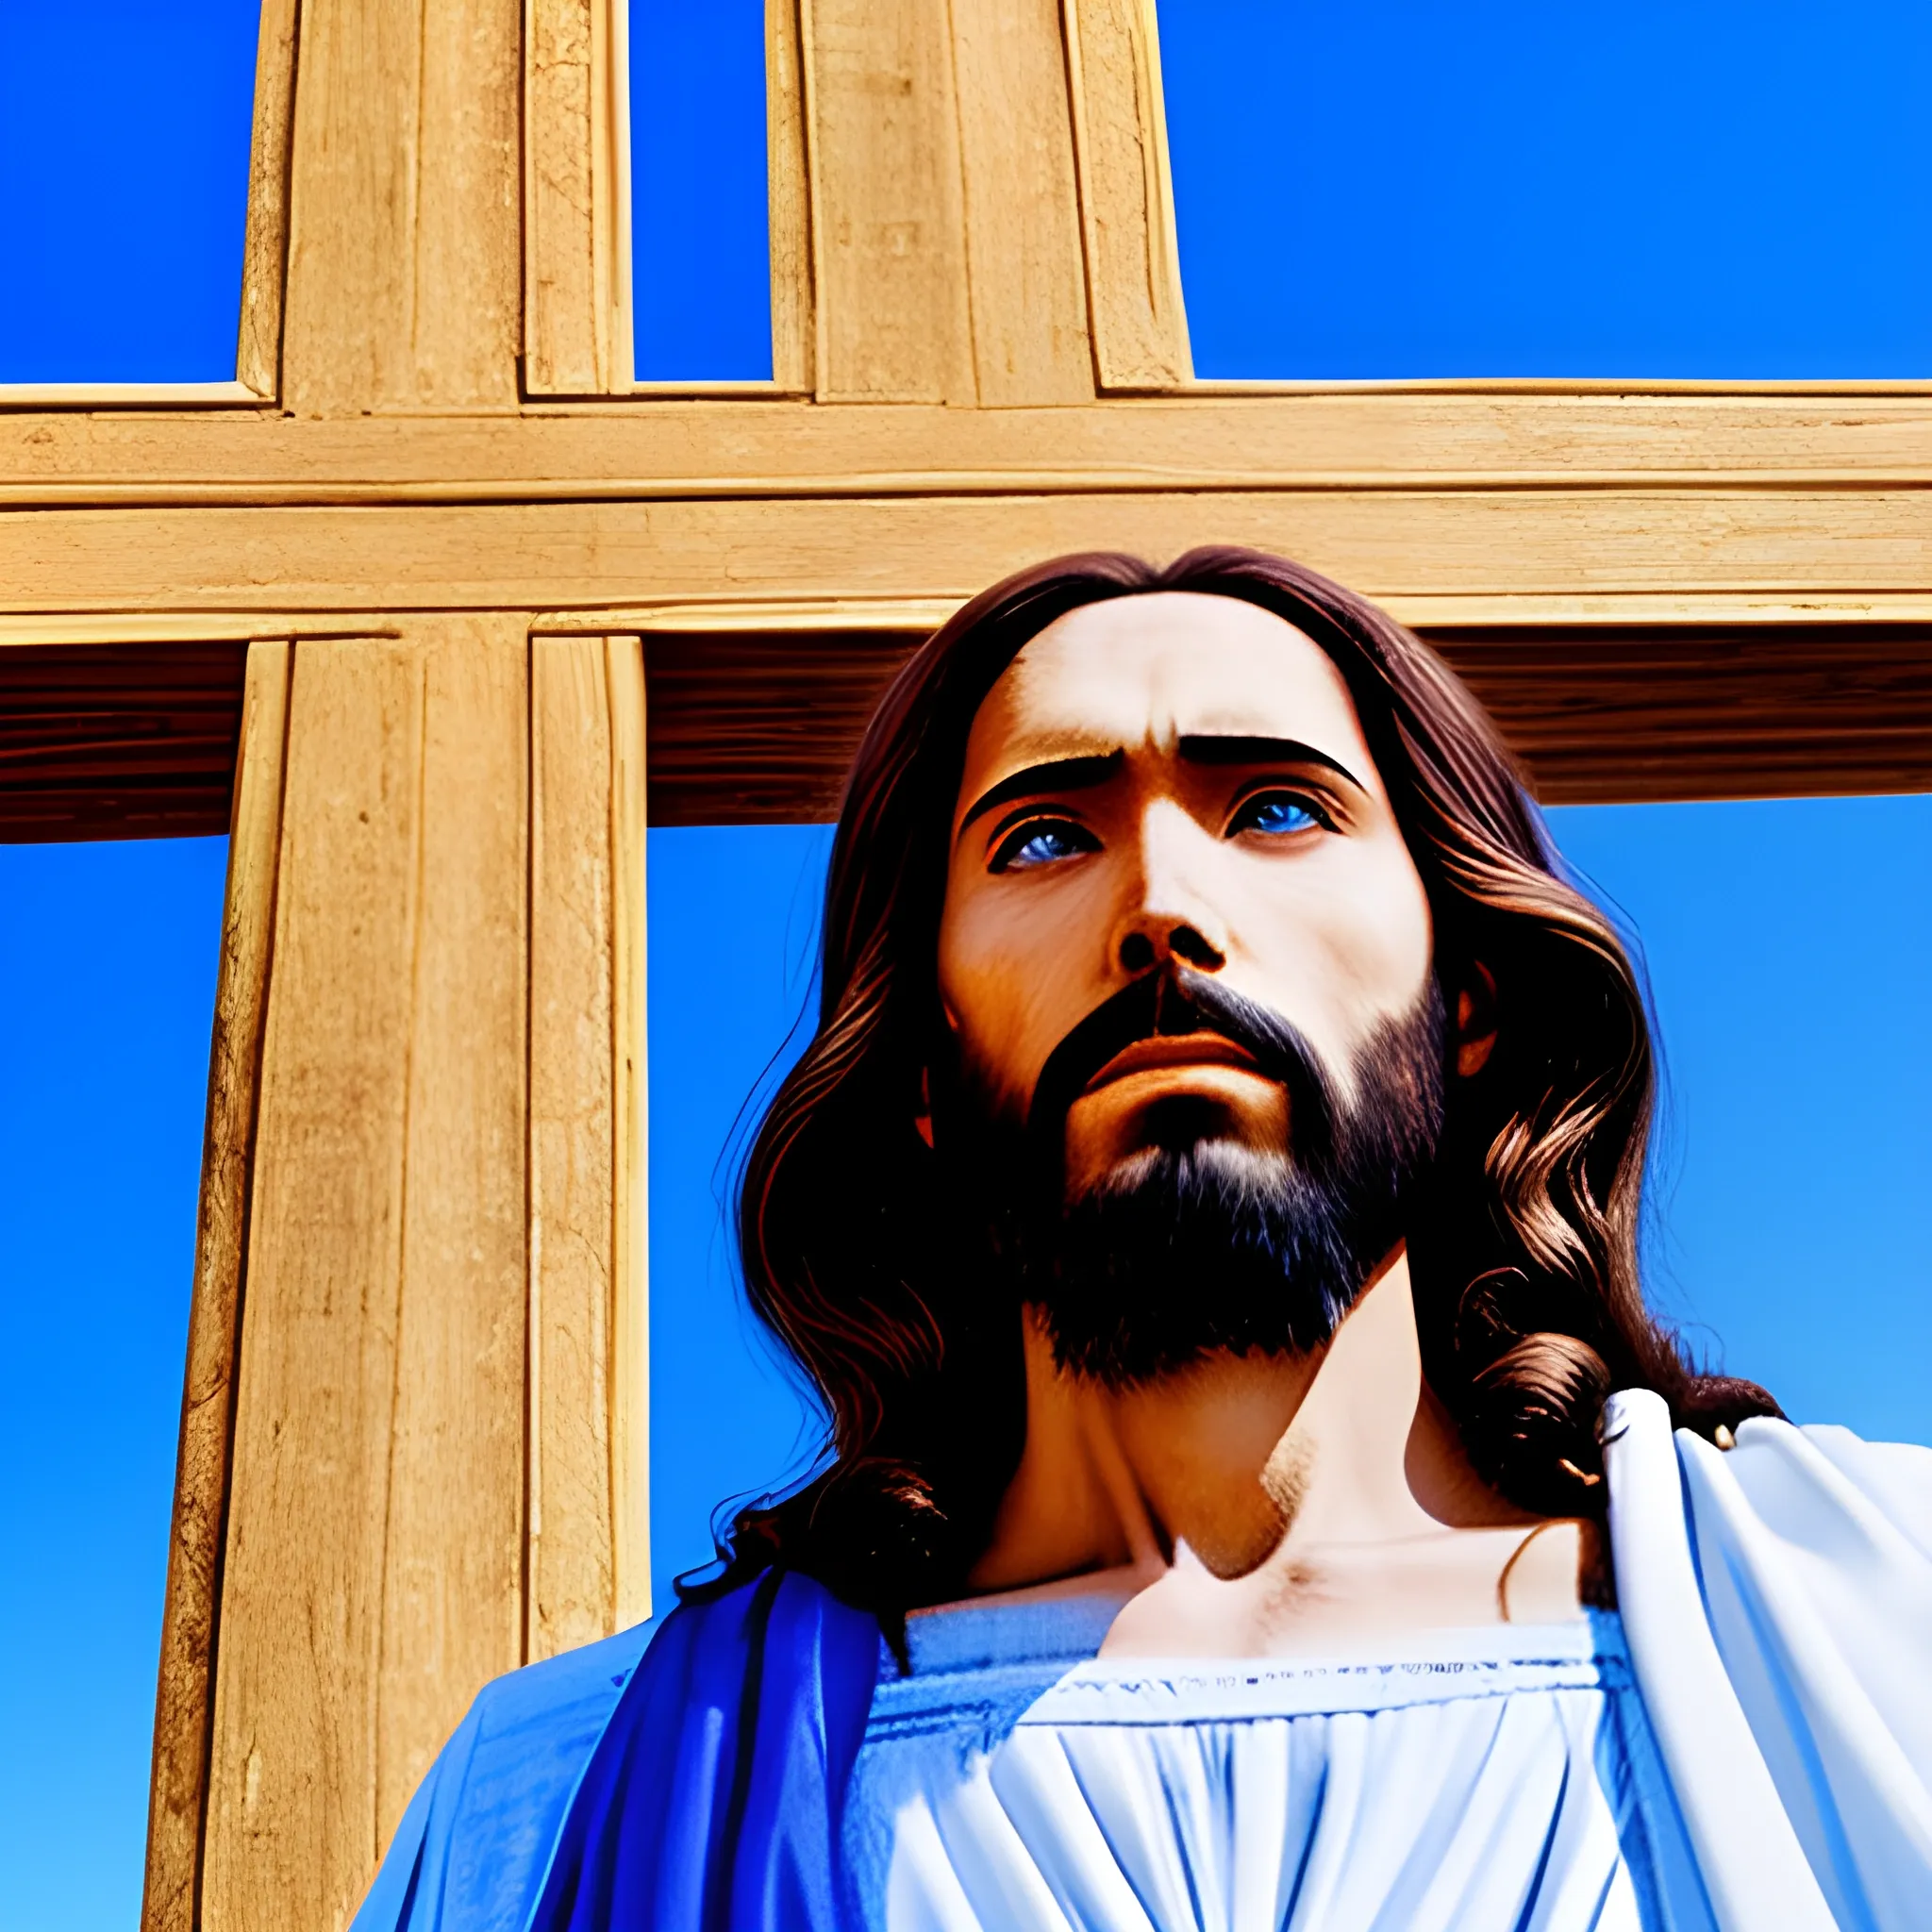 photo of Jesus chist at the cross with a blue sky as a fond - Arthub.ai